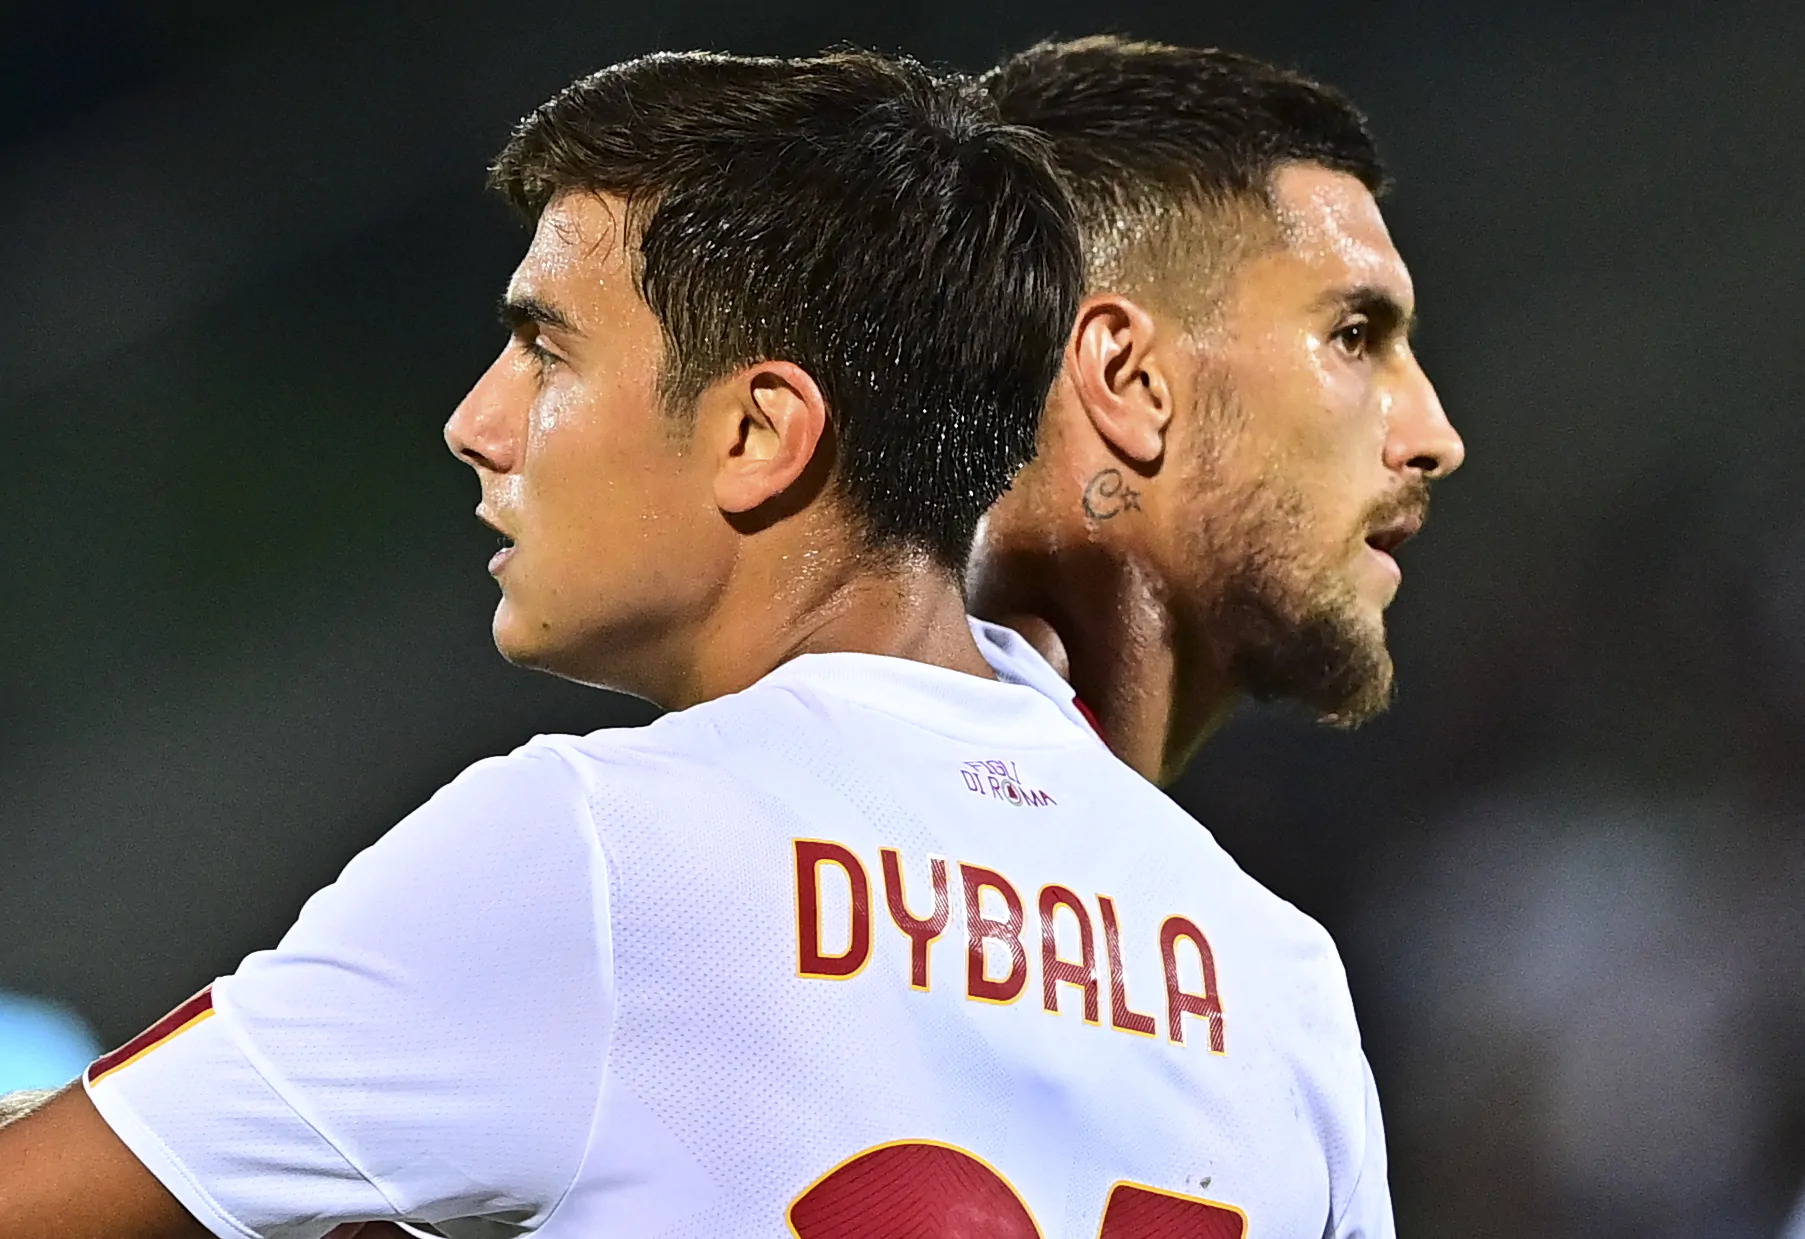 Roma have already endured seven muscular problems in the first month of the season, which is raising questions about their preseason preparation.